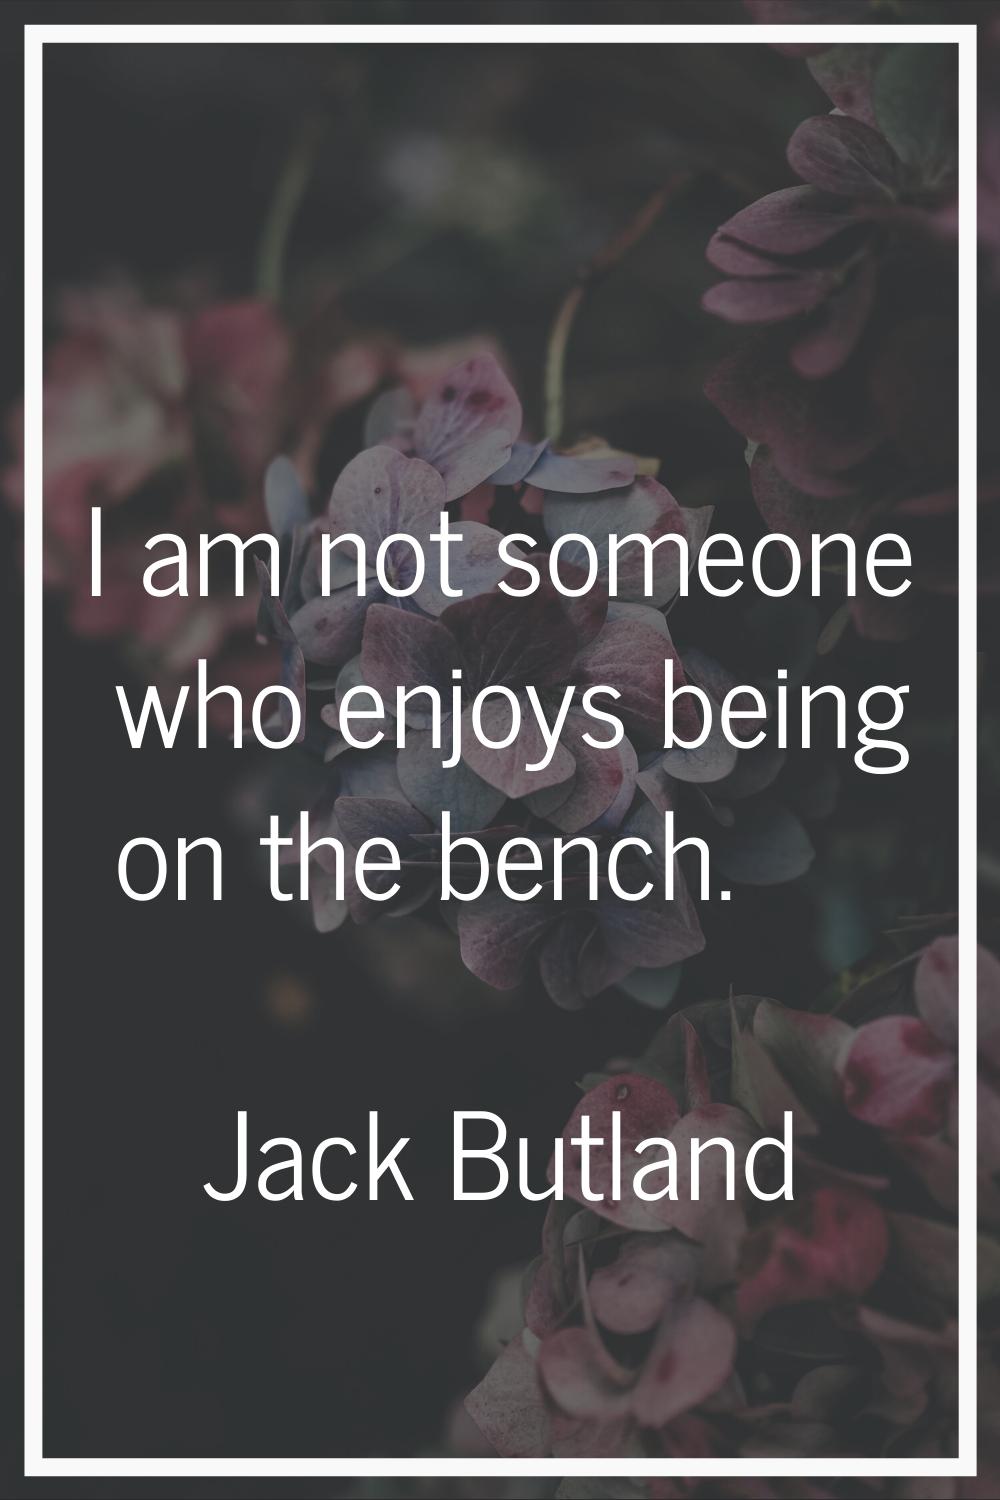 I am not someone who enjoys being on the bench.